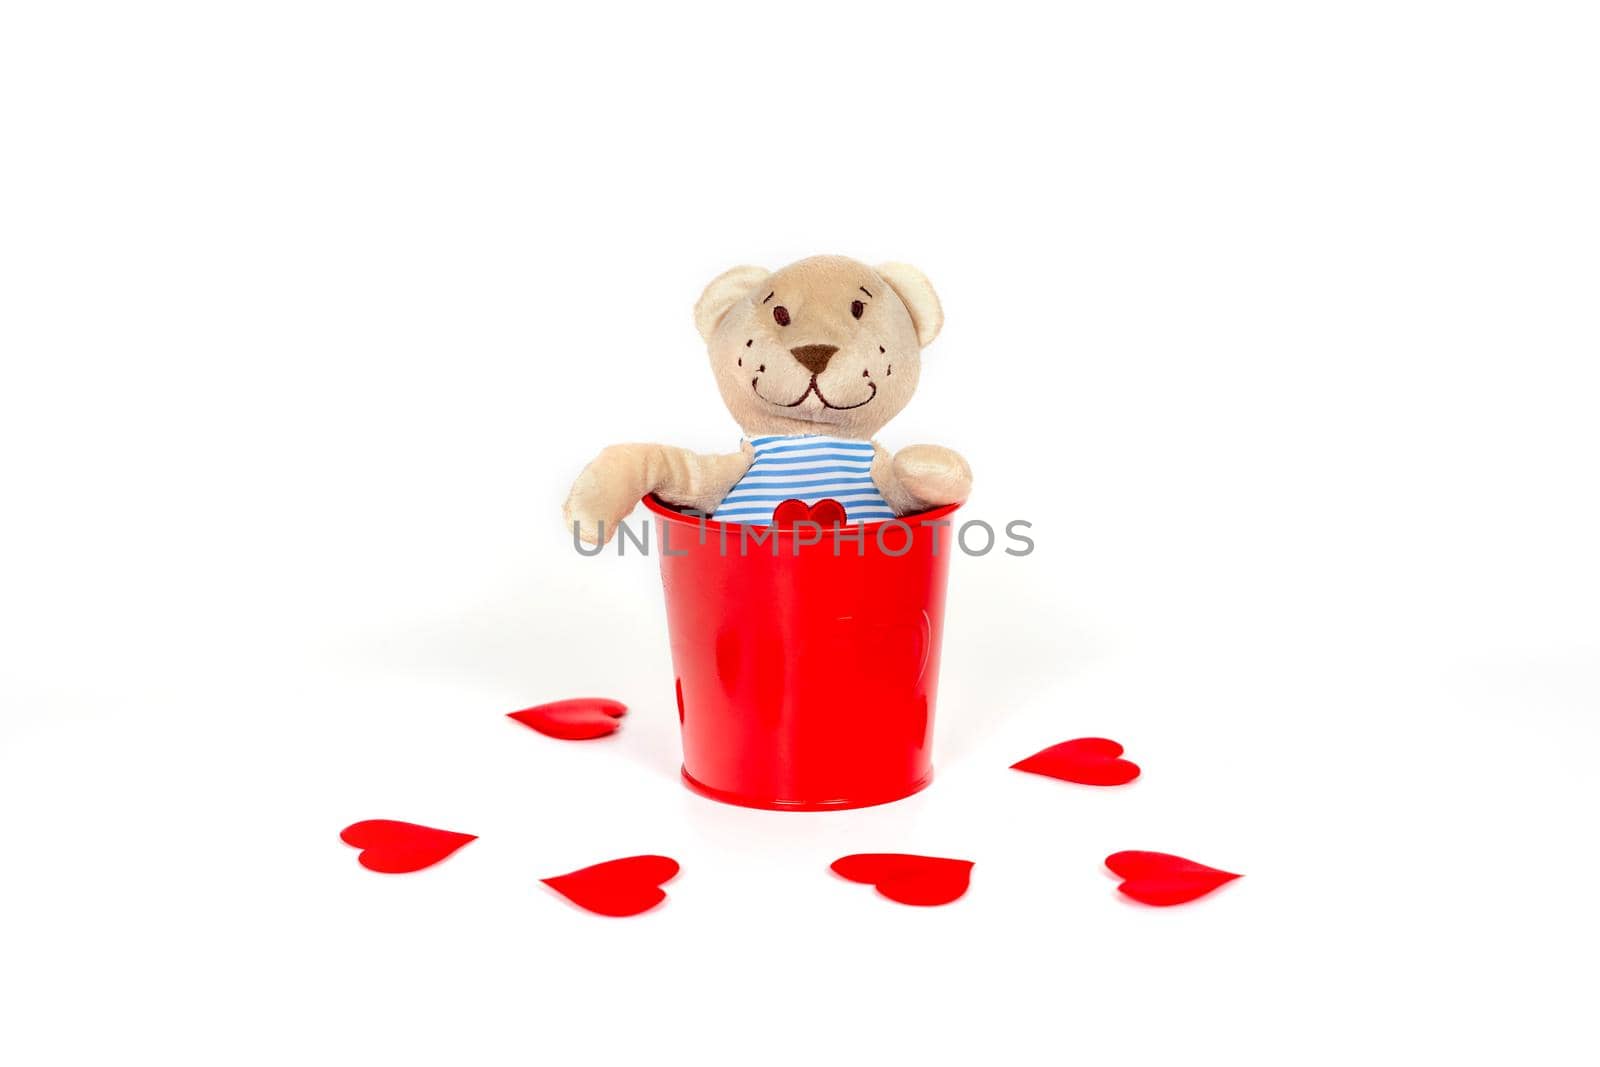 Soft toy bear with an embroidered heart in a red metal bucket on a white by galinasharapova